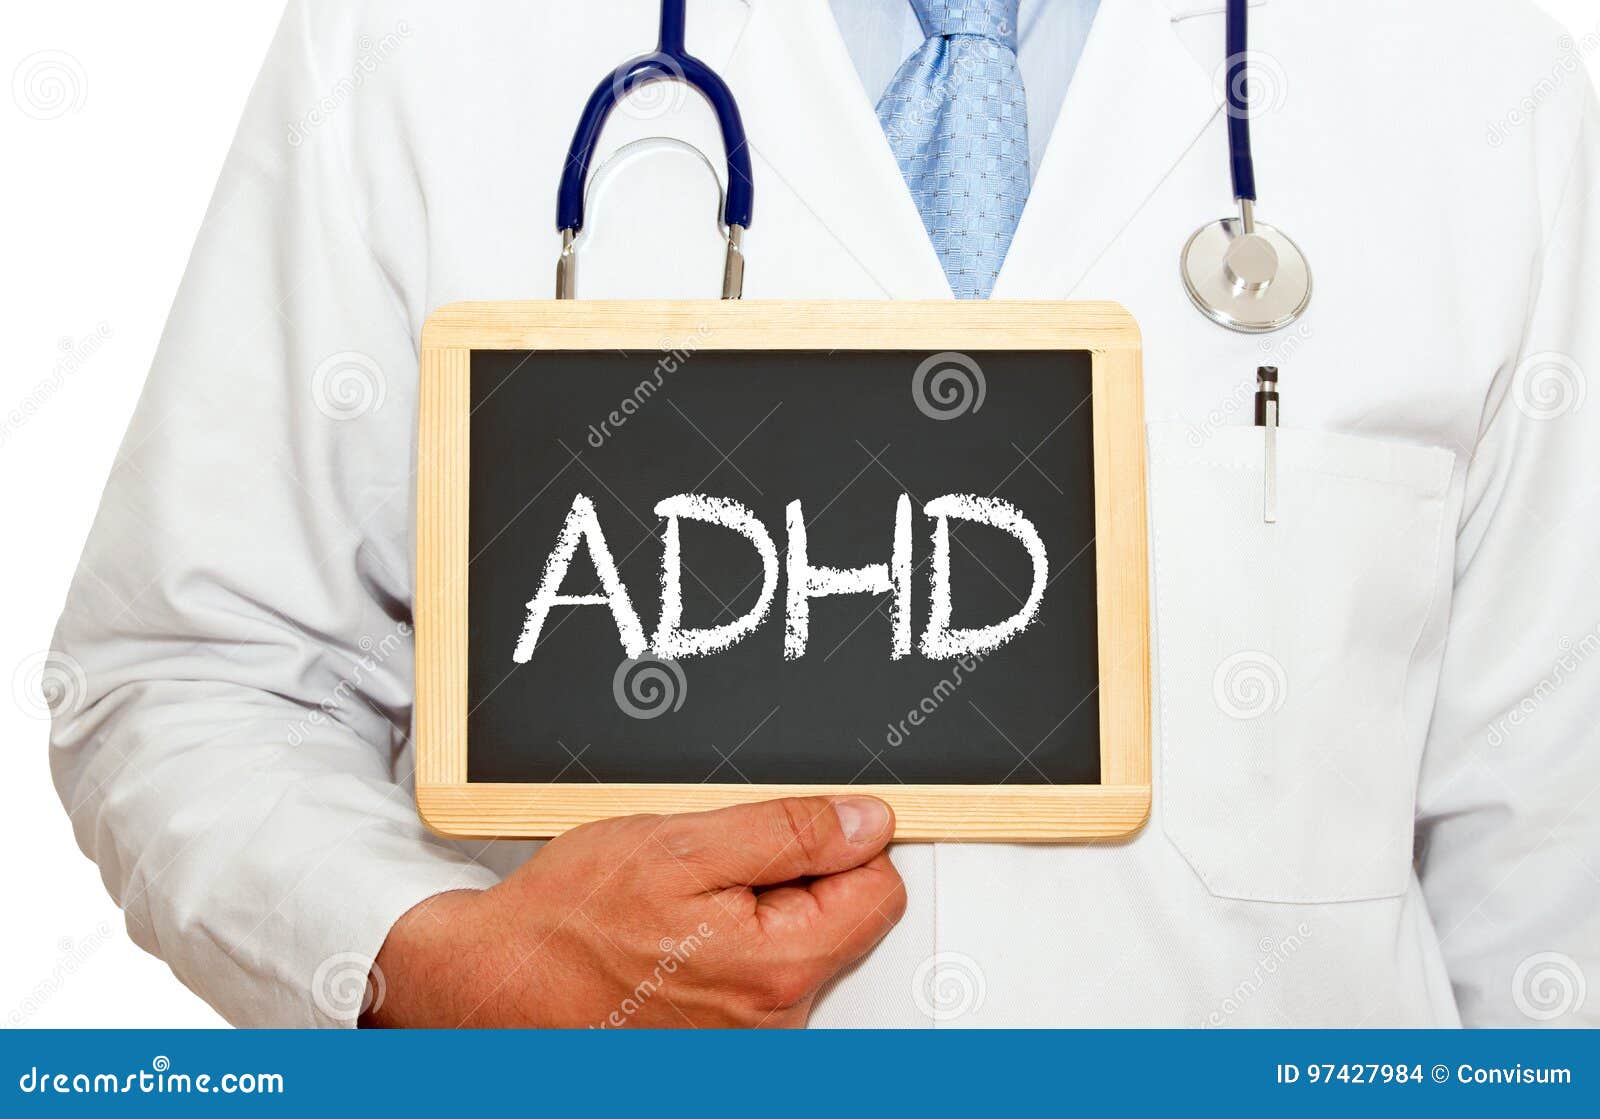 adhd - attention deficit hyperactivity disorder